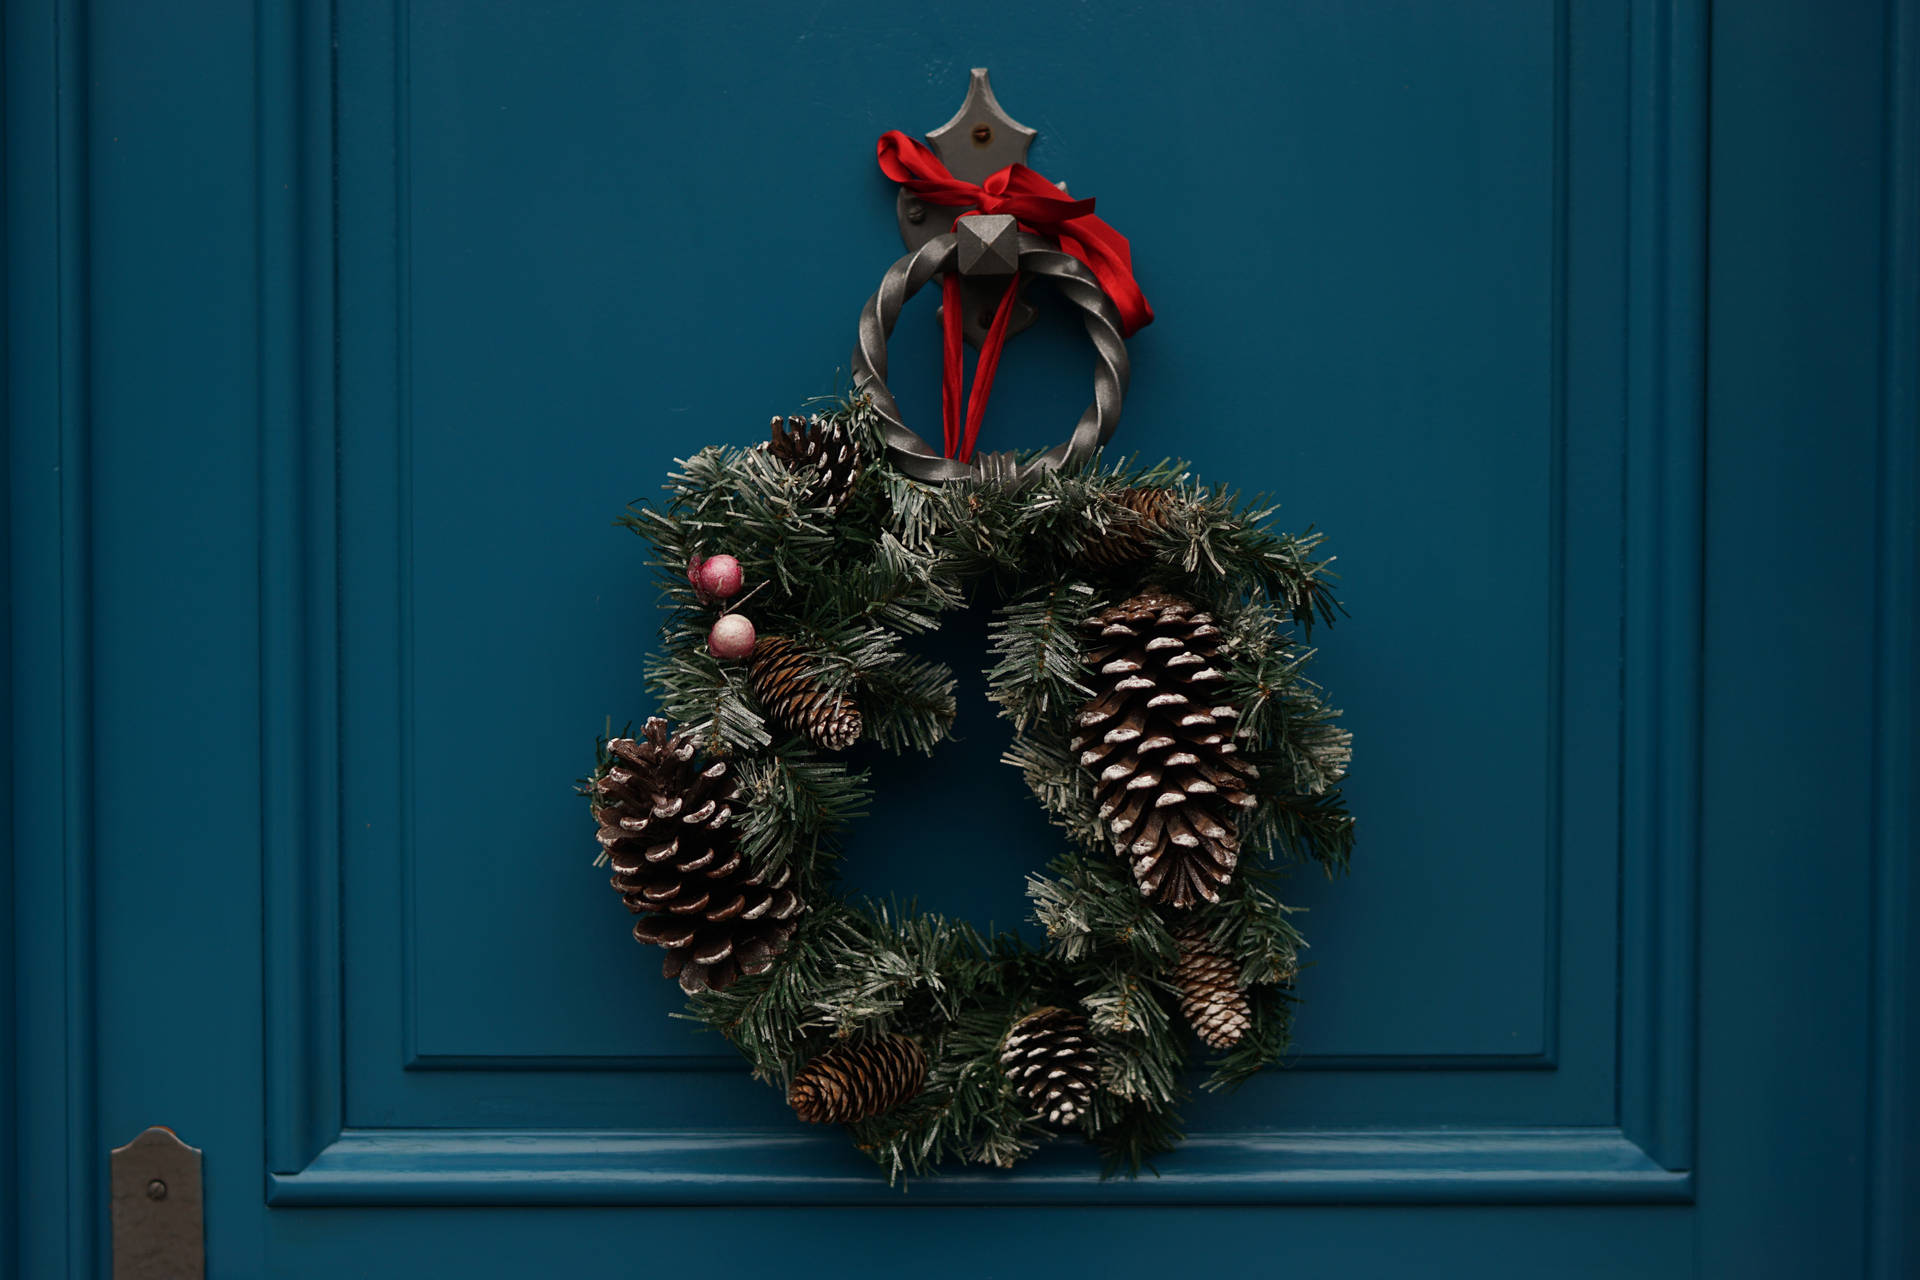 Welcome guests to your winter wonderland with this festive Christmas wreath. Wallpaper